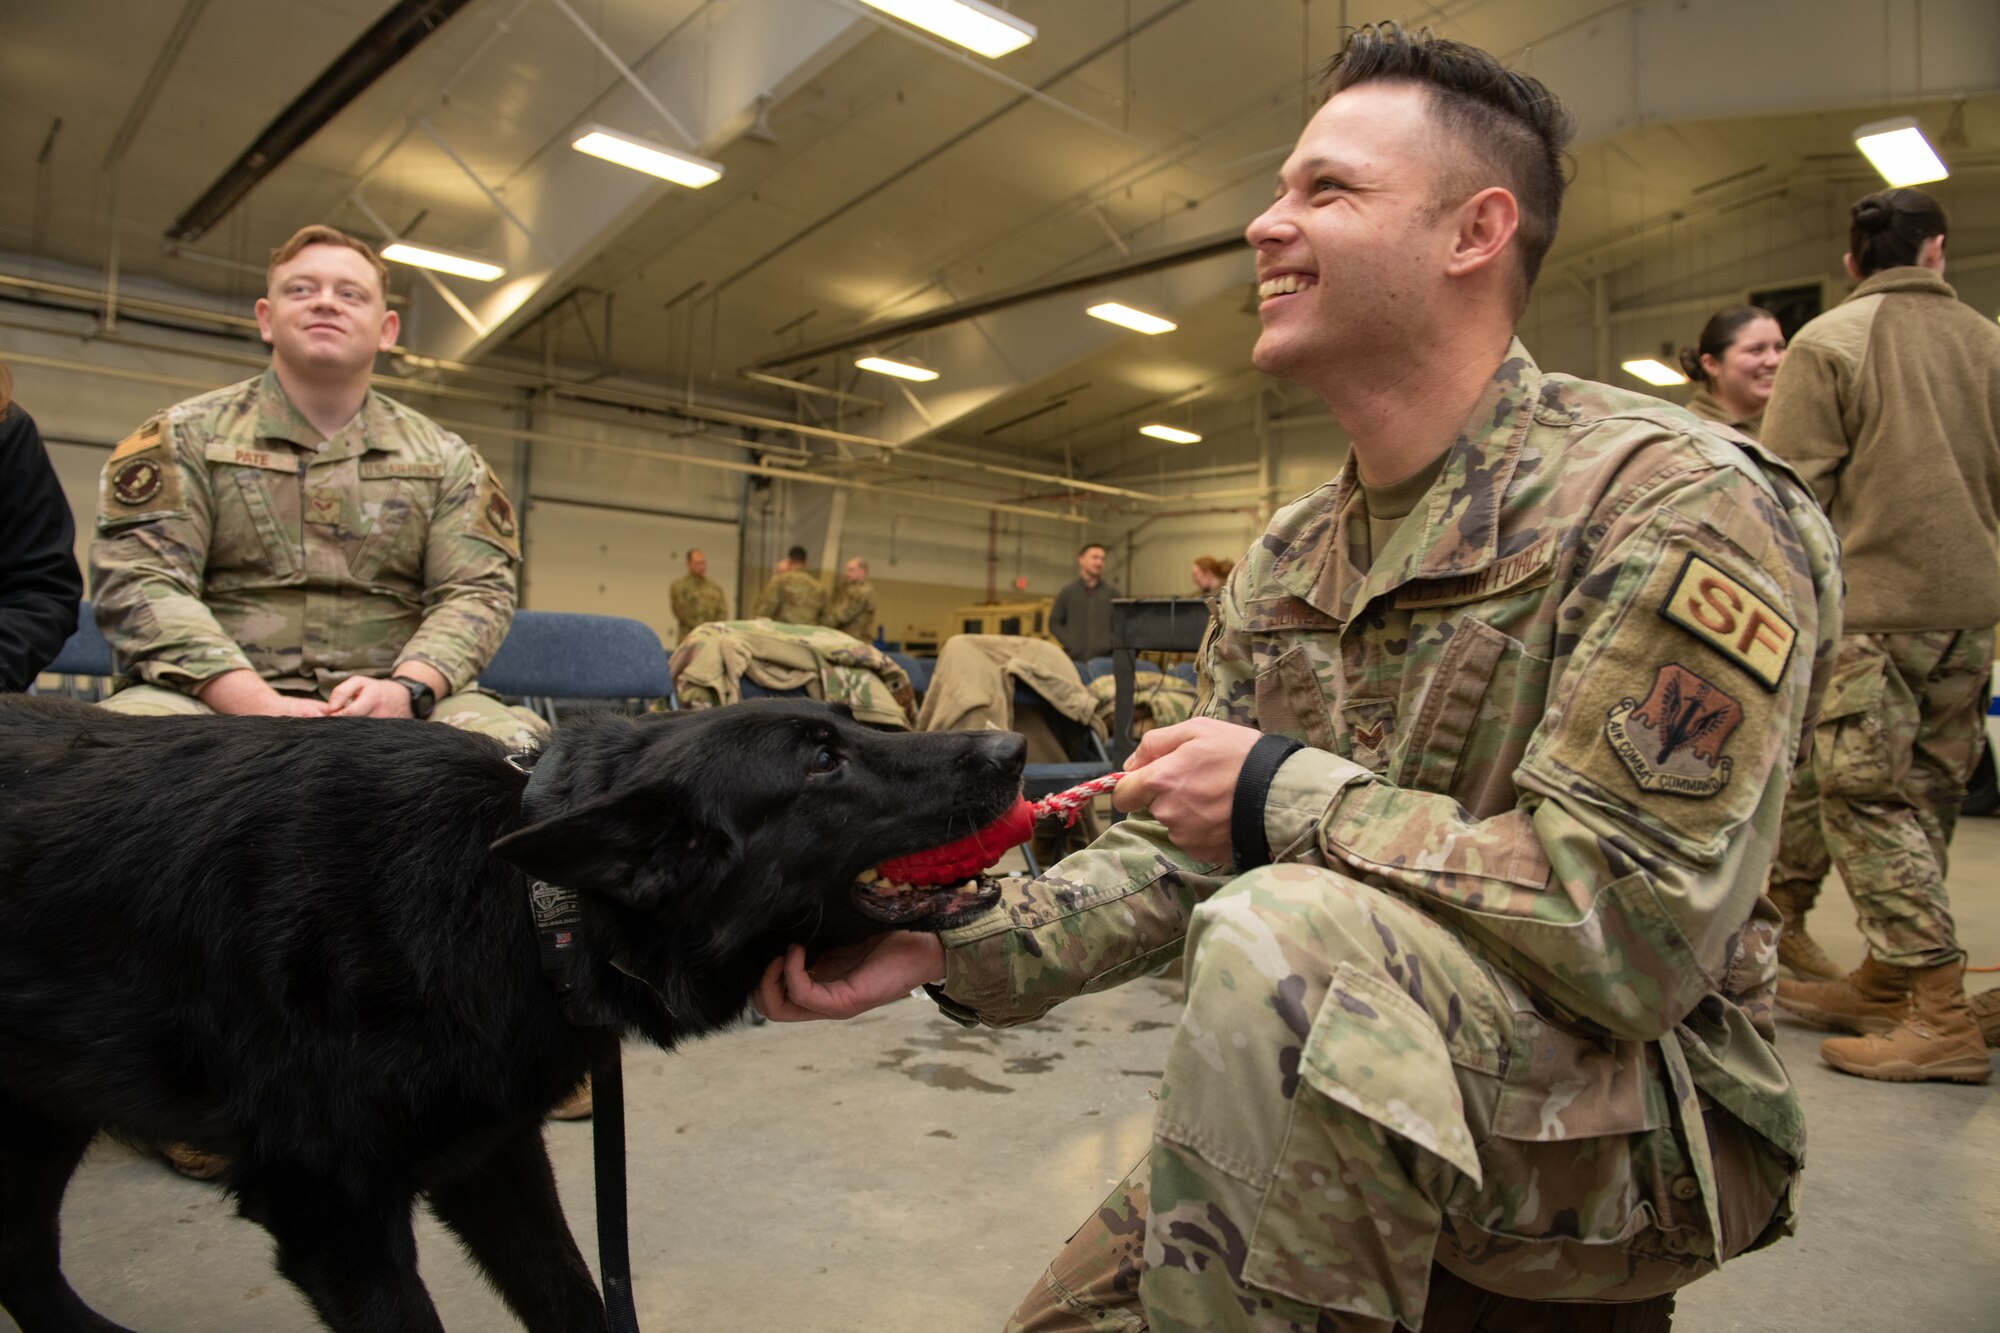 A man in a green uniform plays with a black dog.